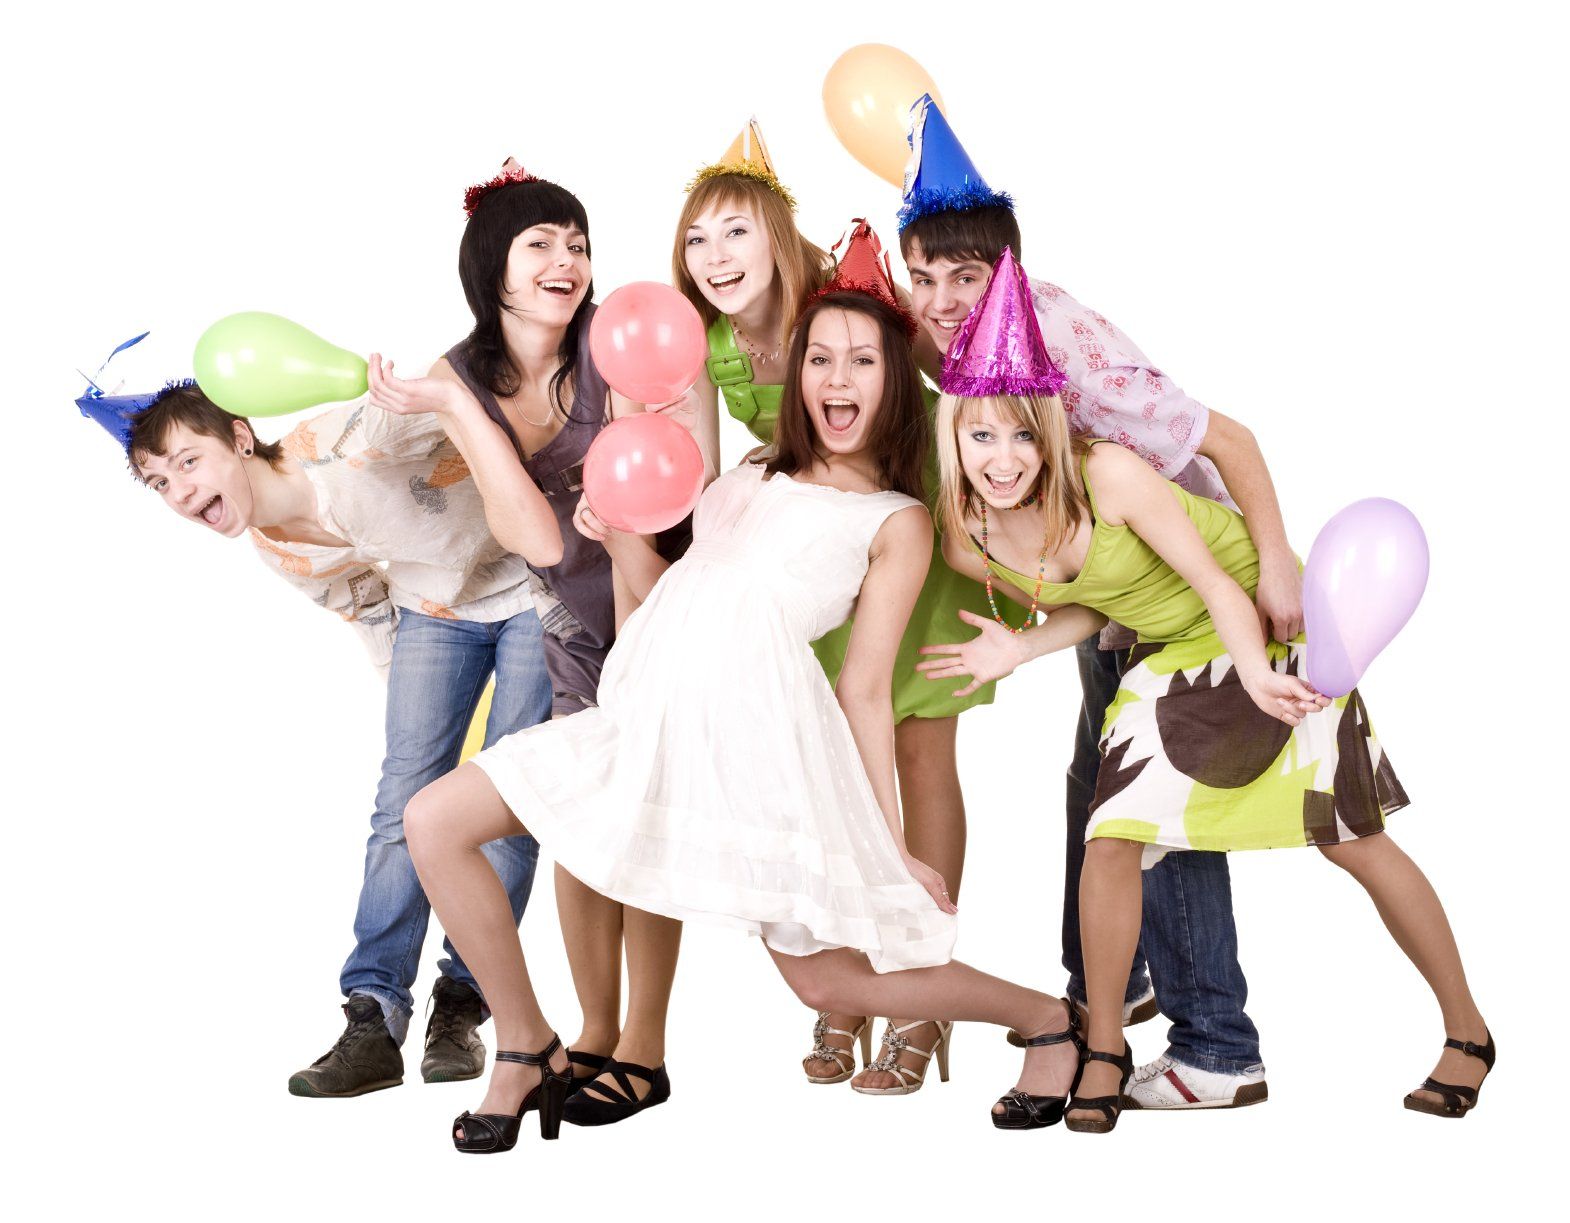 Six young people with party hats having a good laugh